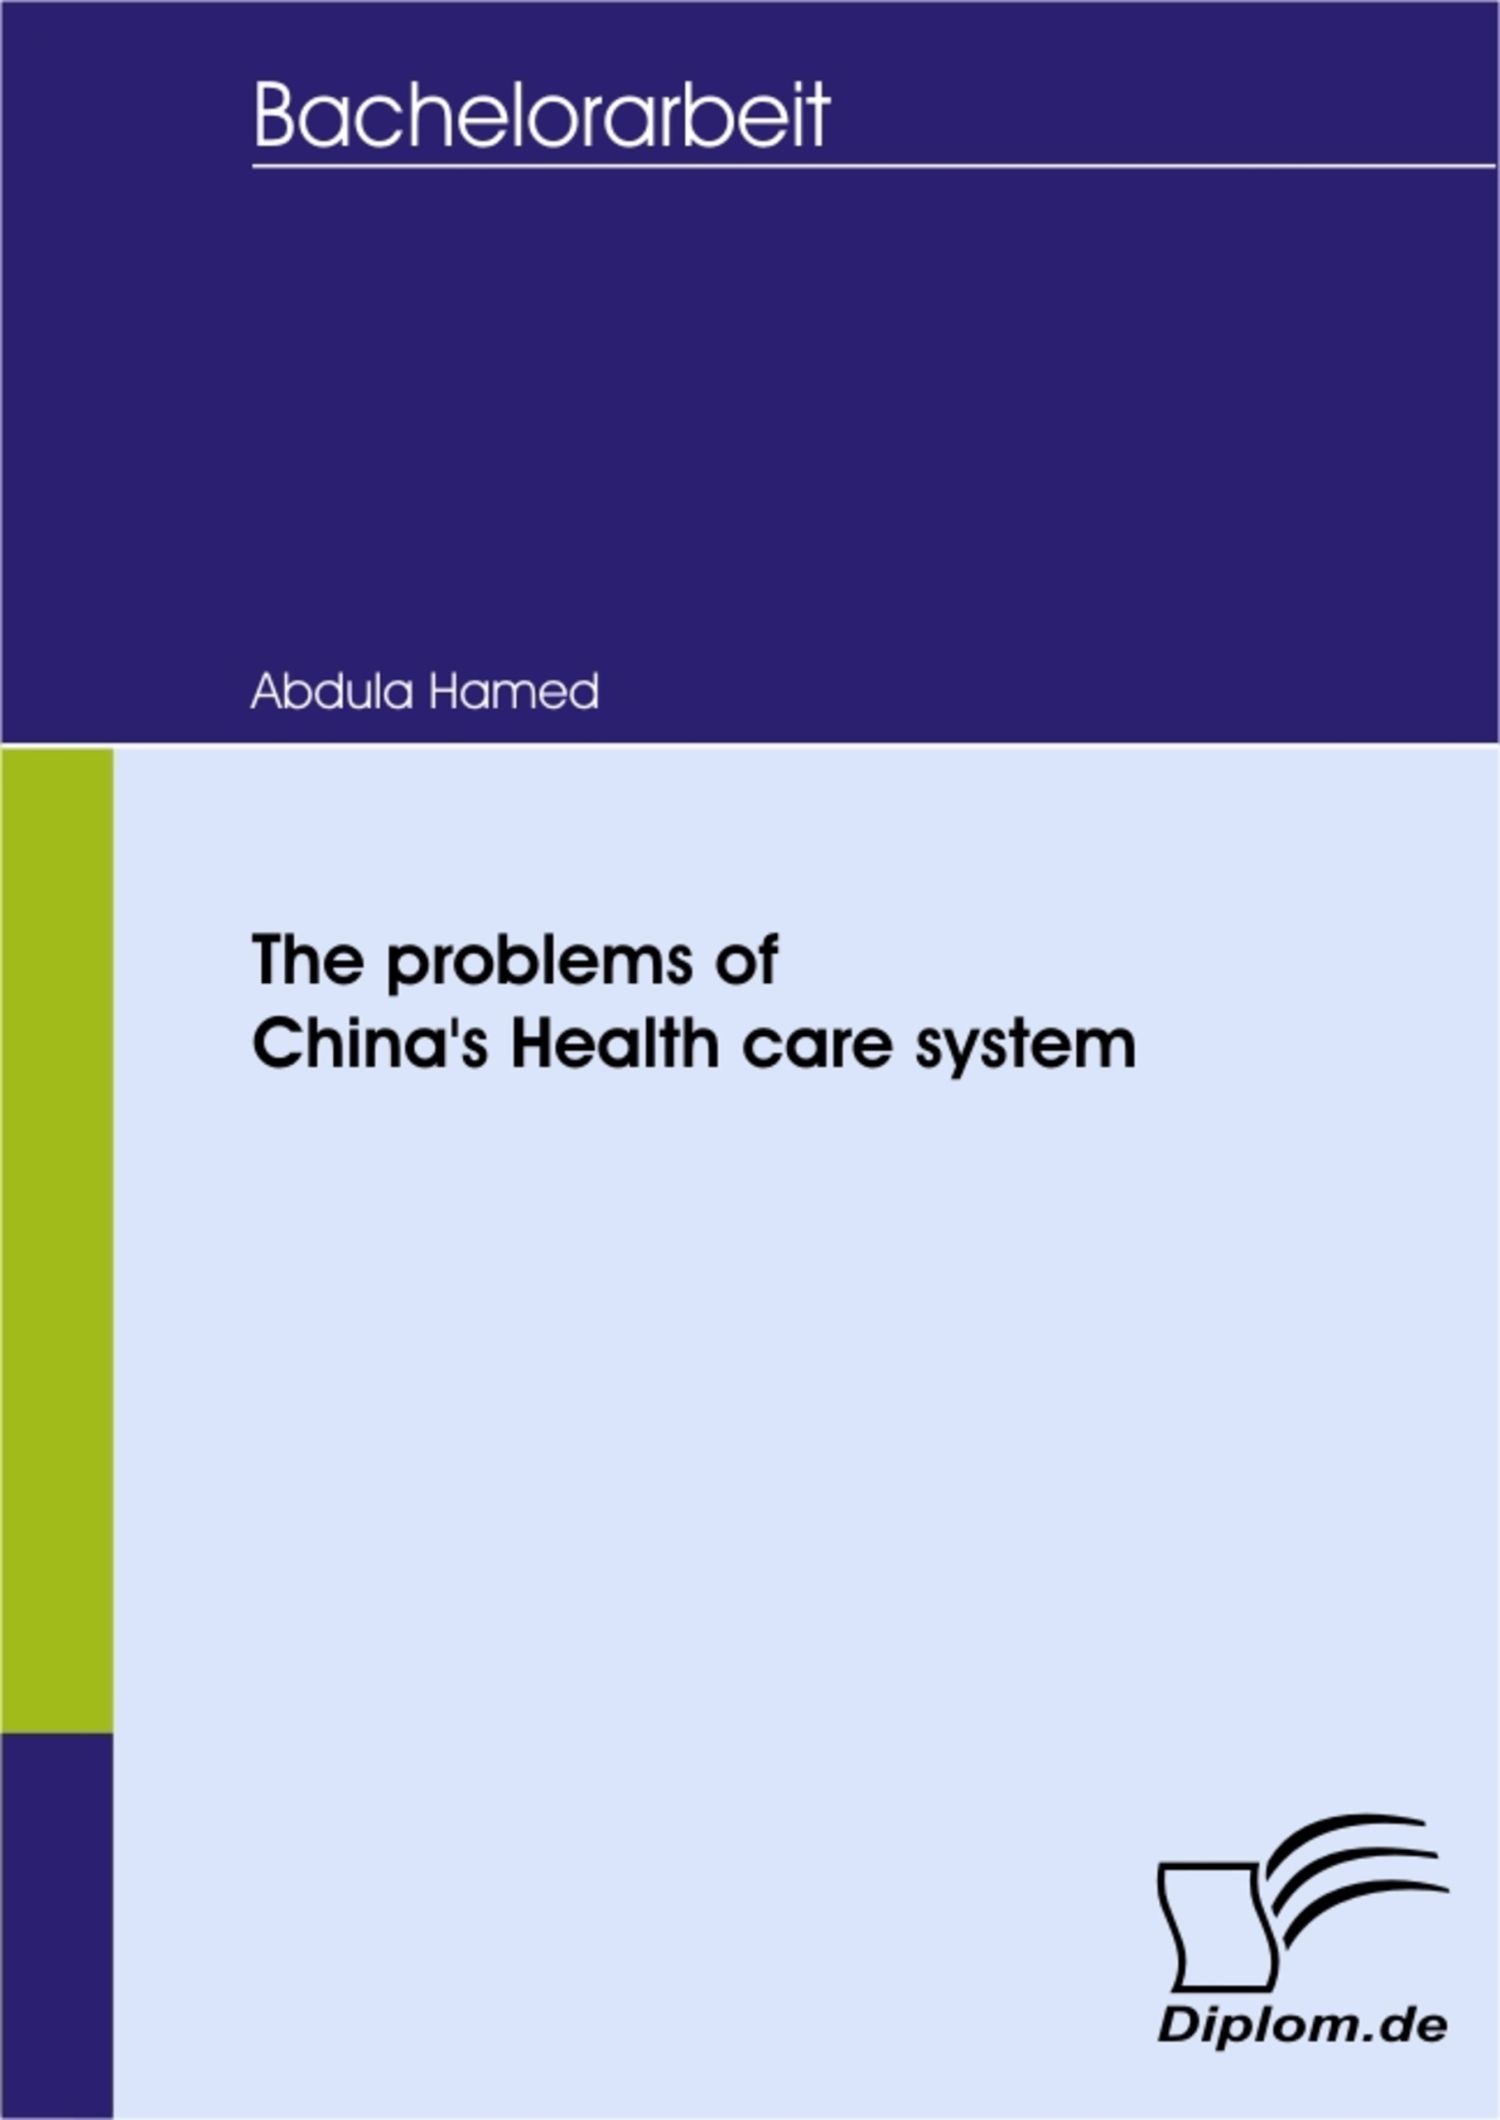 The problems of China's Health care system